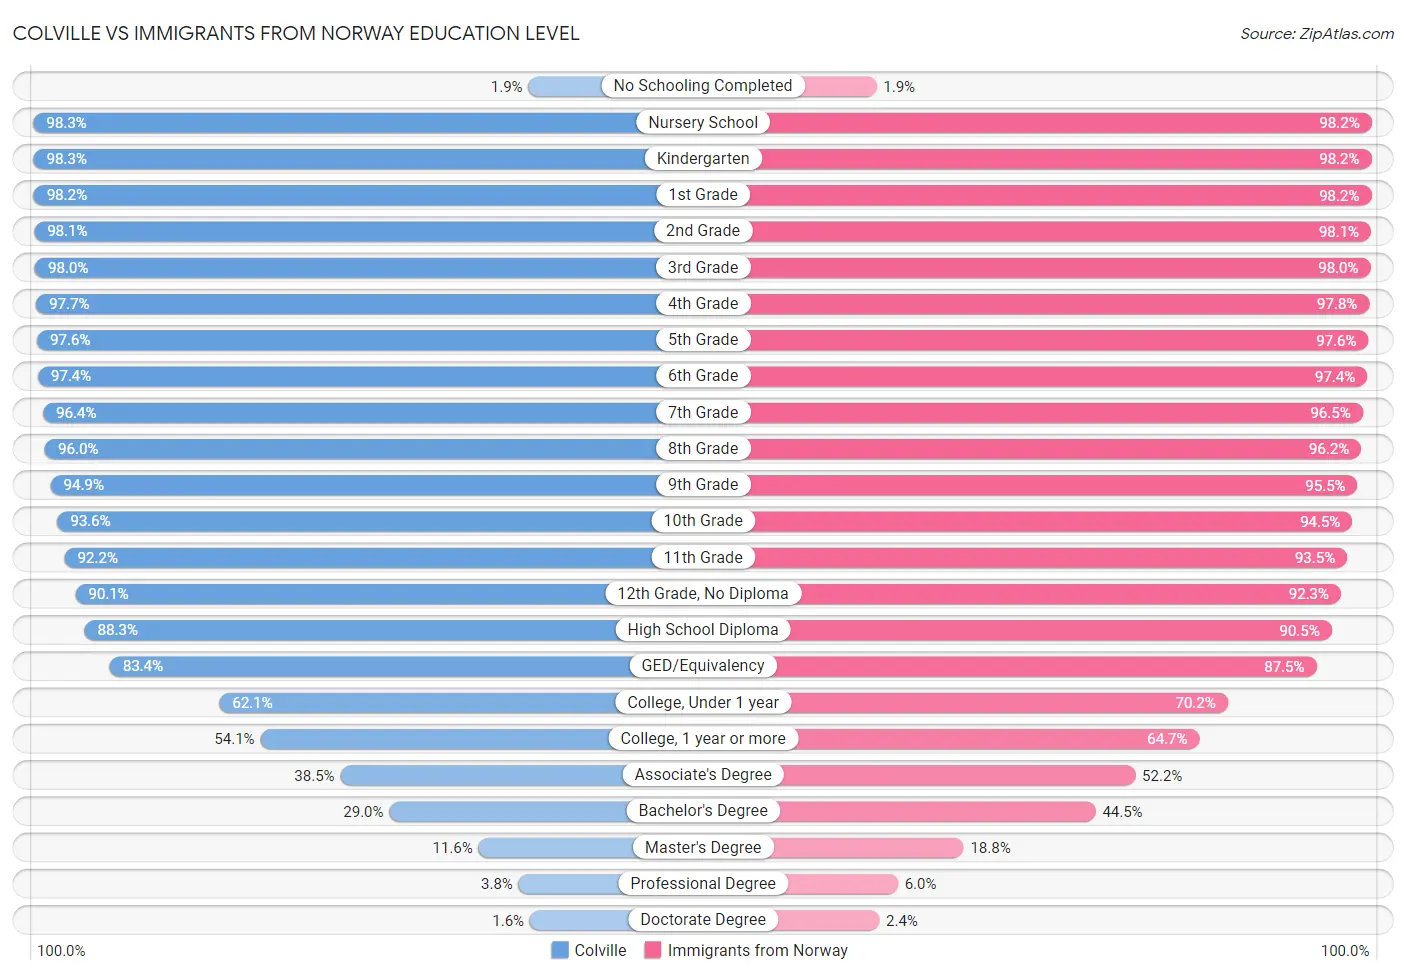 Colville vs Immigrants from Norway Education Level